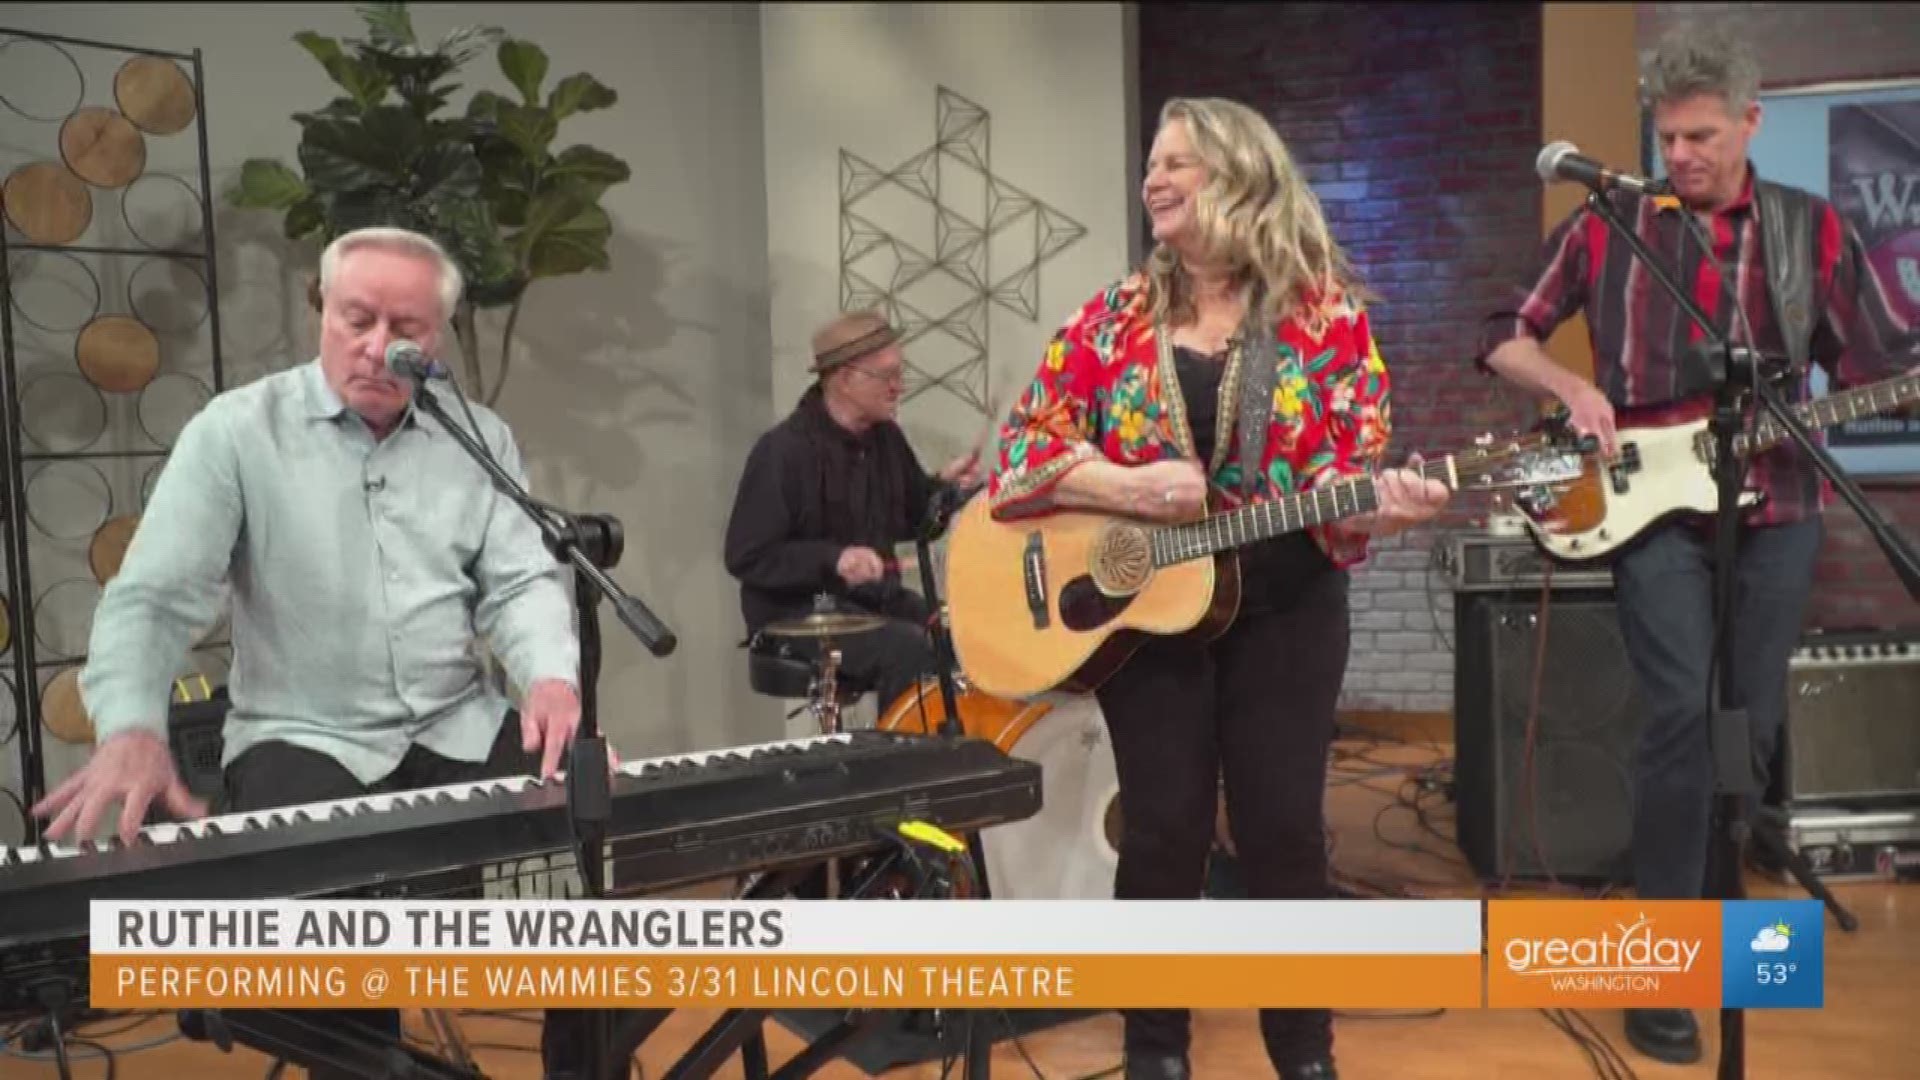 Ruthie and the Wranglers, featuring former WUSA9 assignment editor Bill Starks, perform their song "In the Tank" ahead of their performance this Sunday, March 31, at the Wammies 2019!